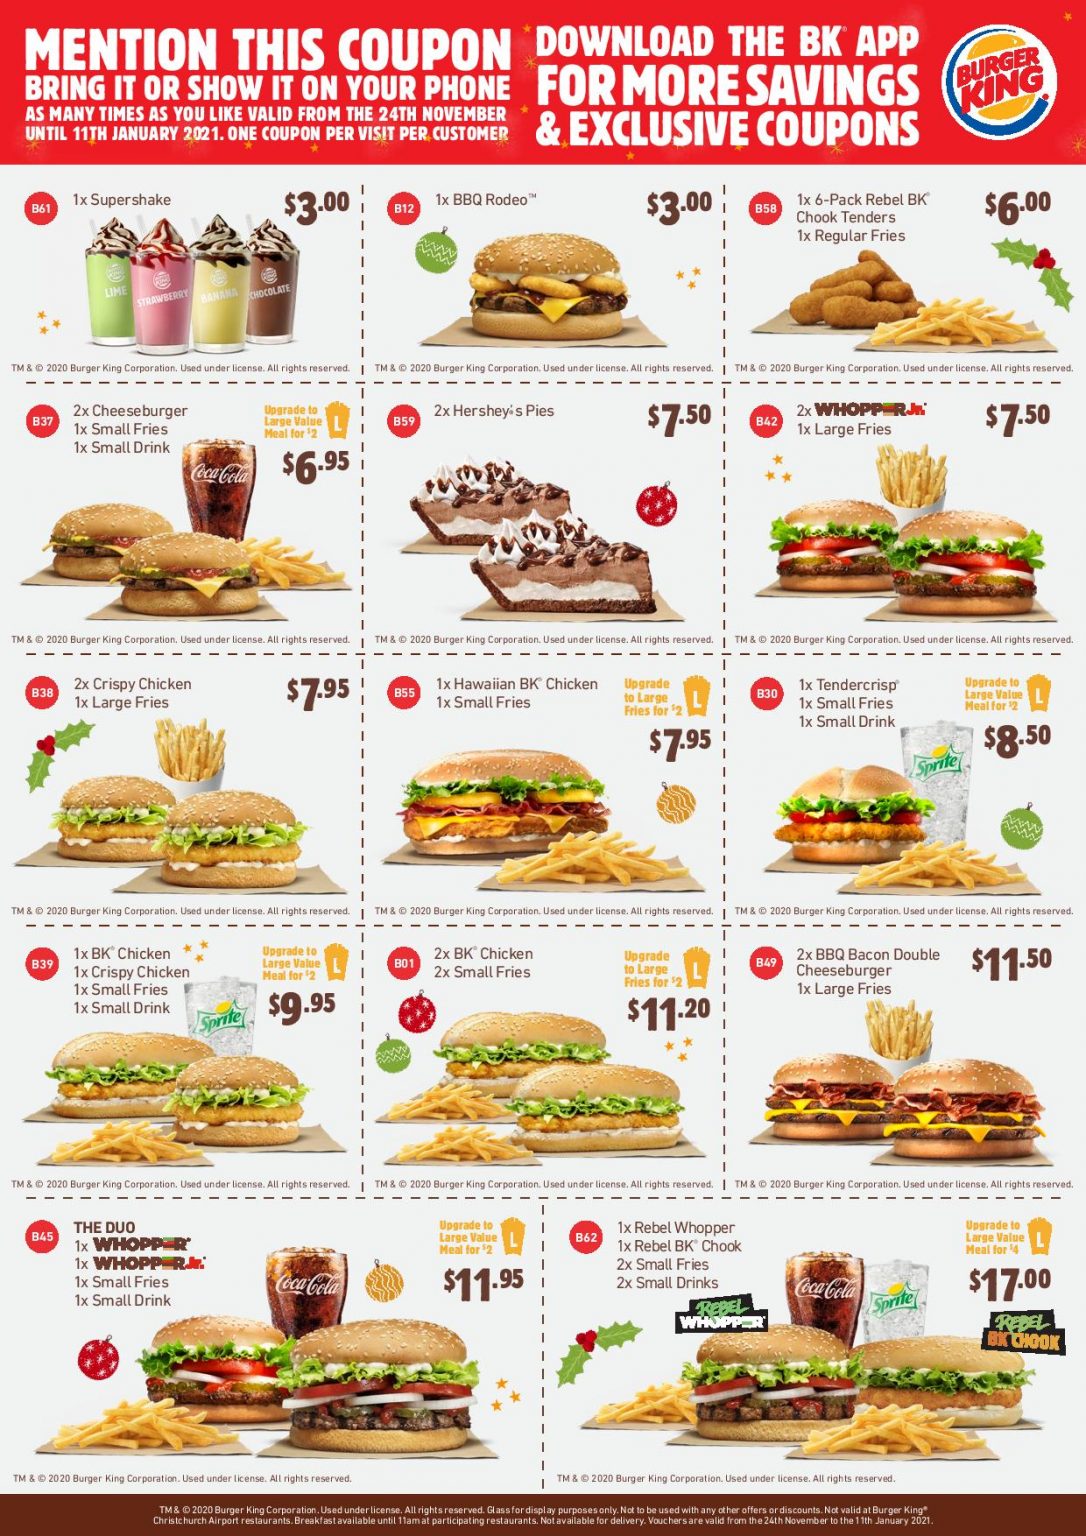 DEAL Burger King Coupons valid until 11 January 2021 Latest BK